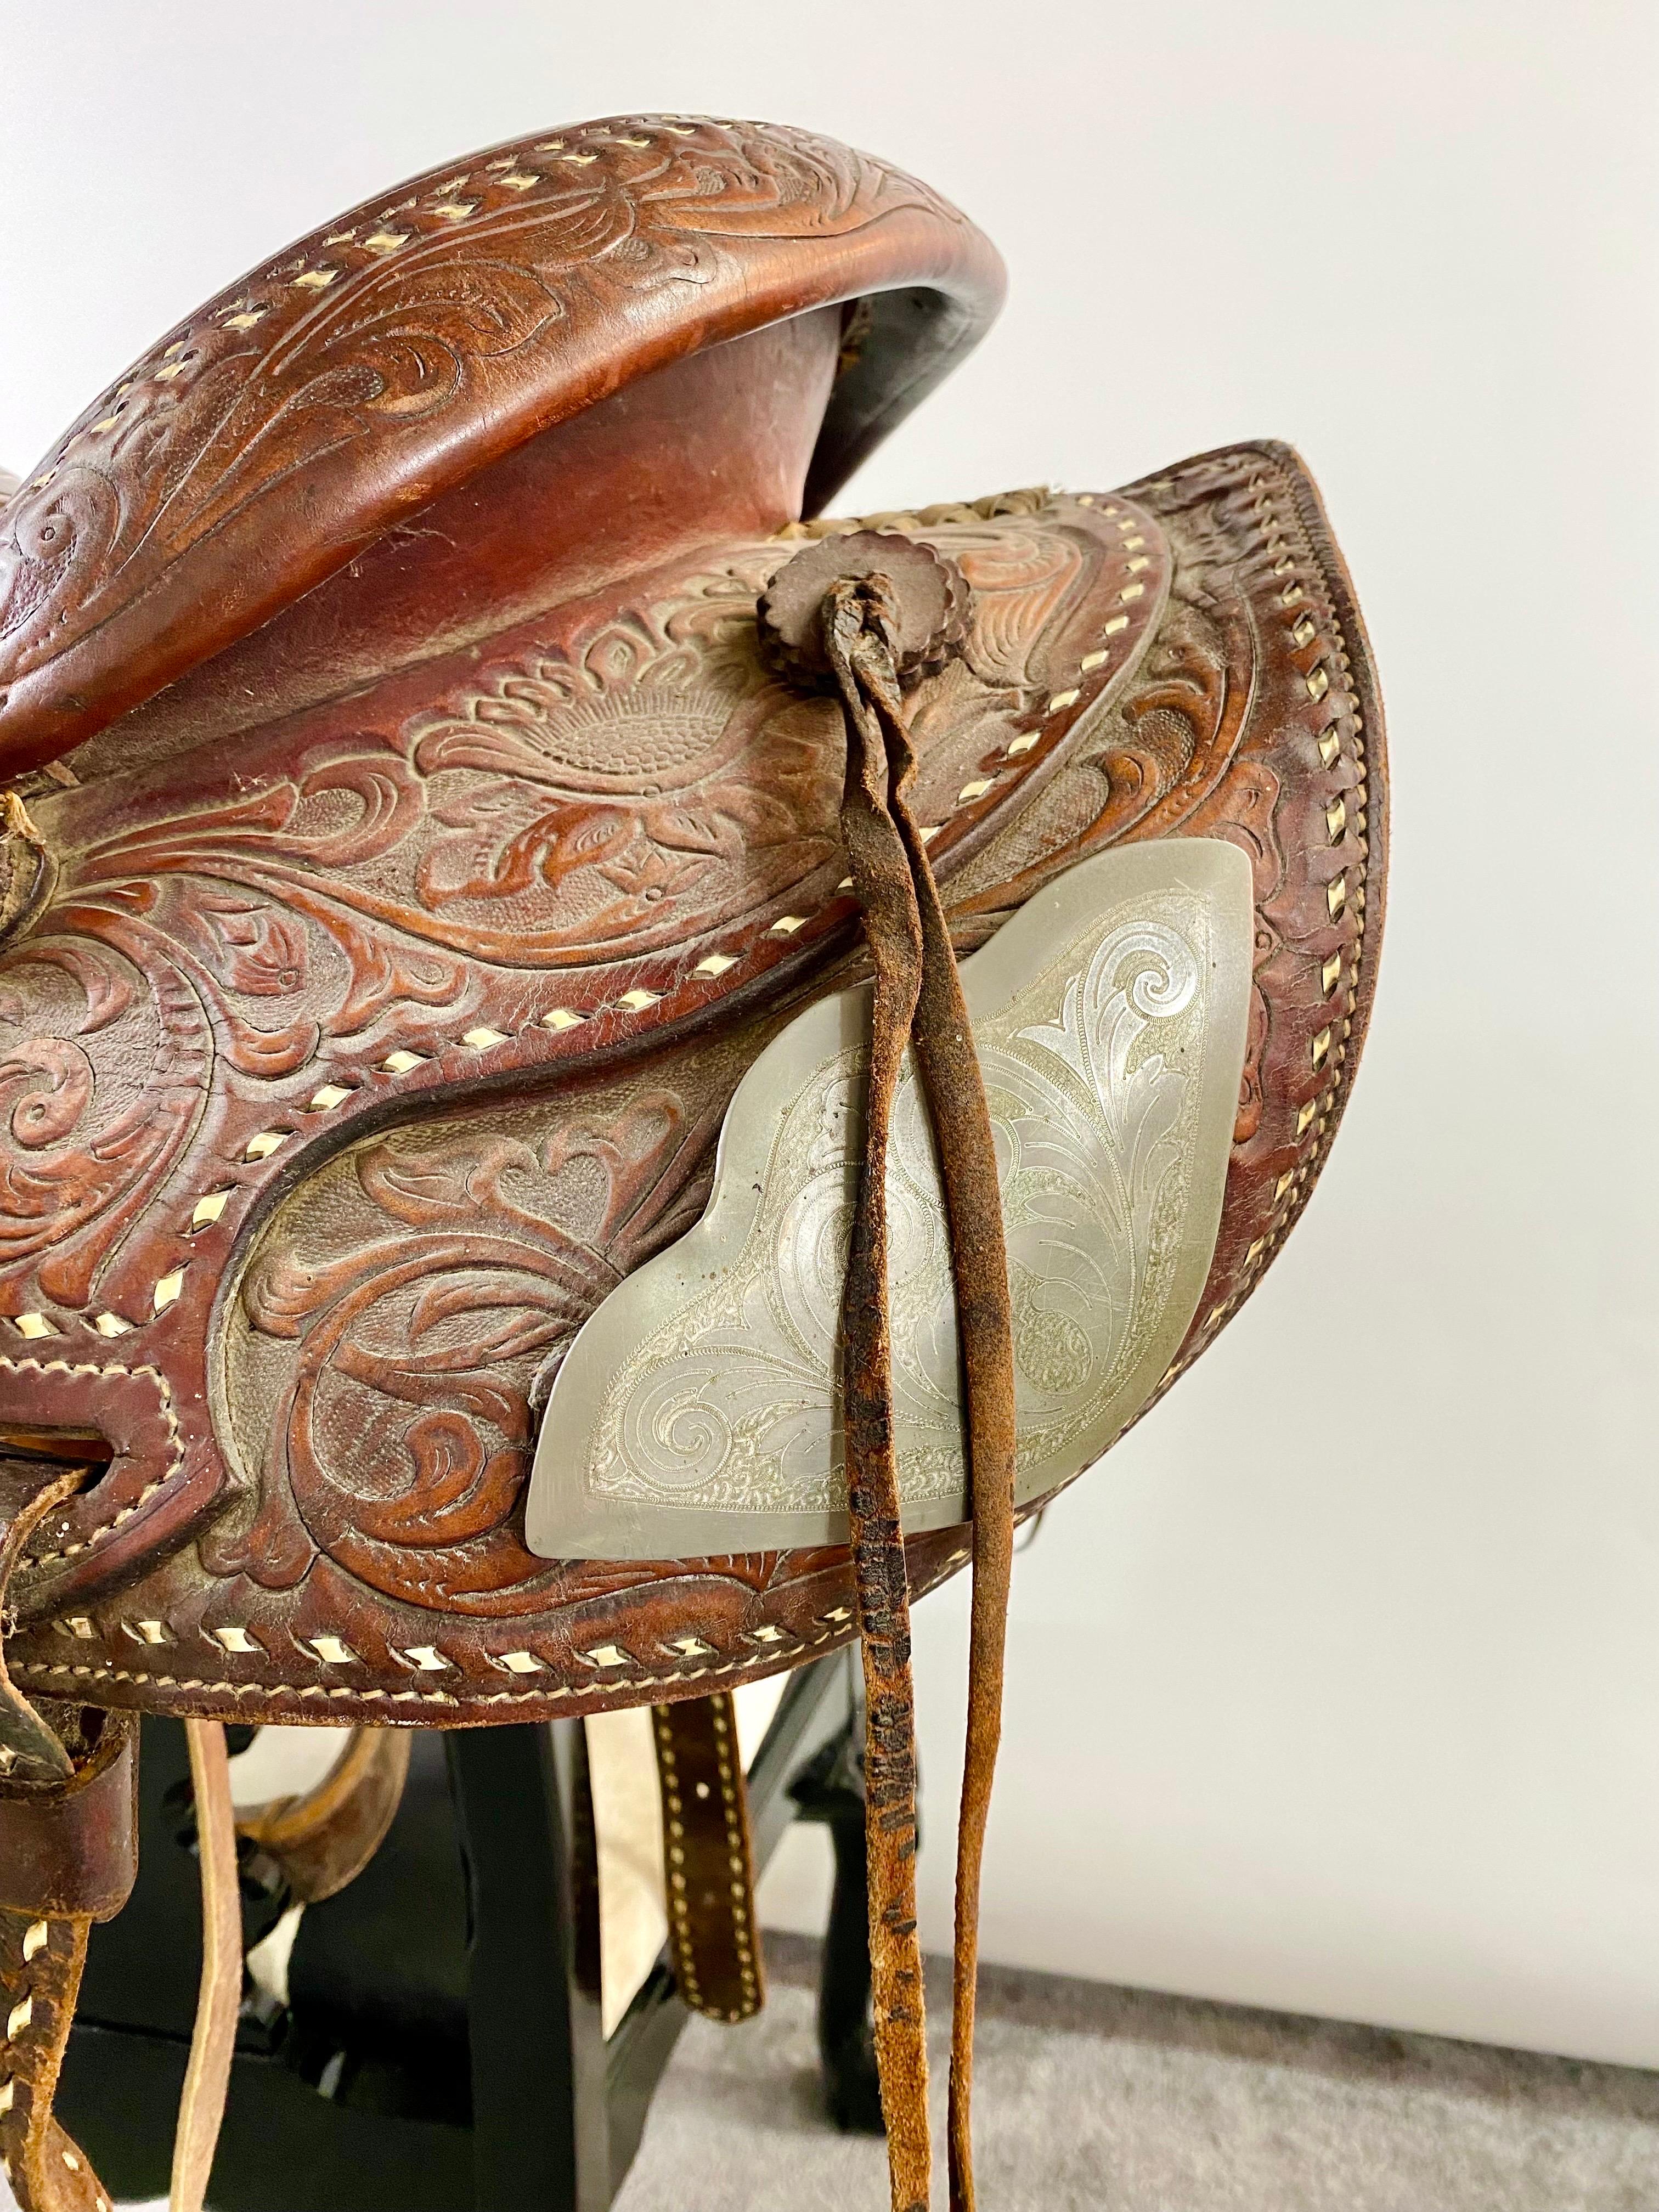 A high quality vintage western cowboy saddle. The saddle is handmade using genuine quality leather and shows impressive carving and design and is padded with wool from the inside. The saddle is numbered on the side.  This vintage leather cowboy